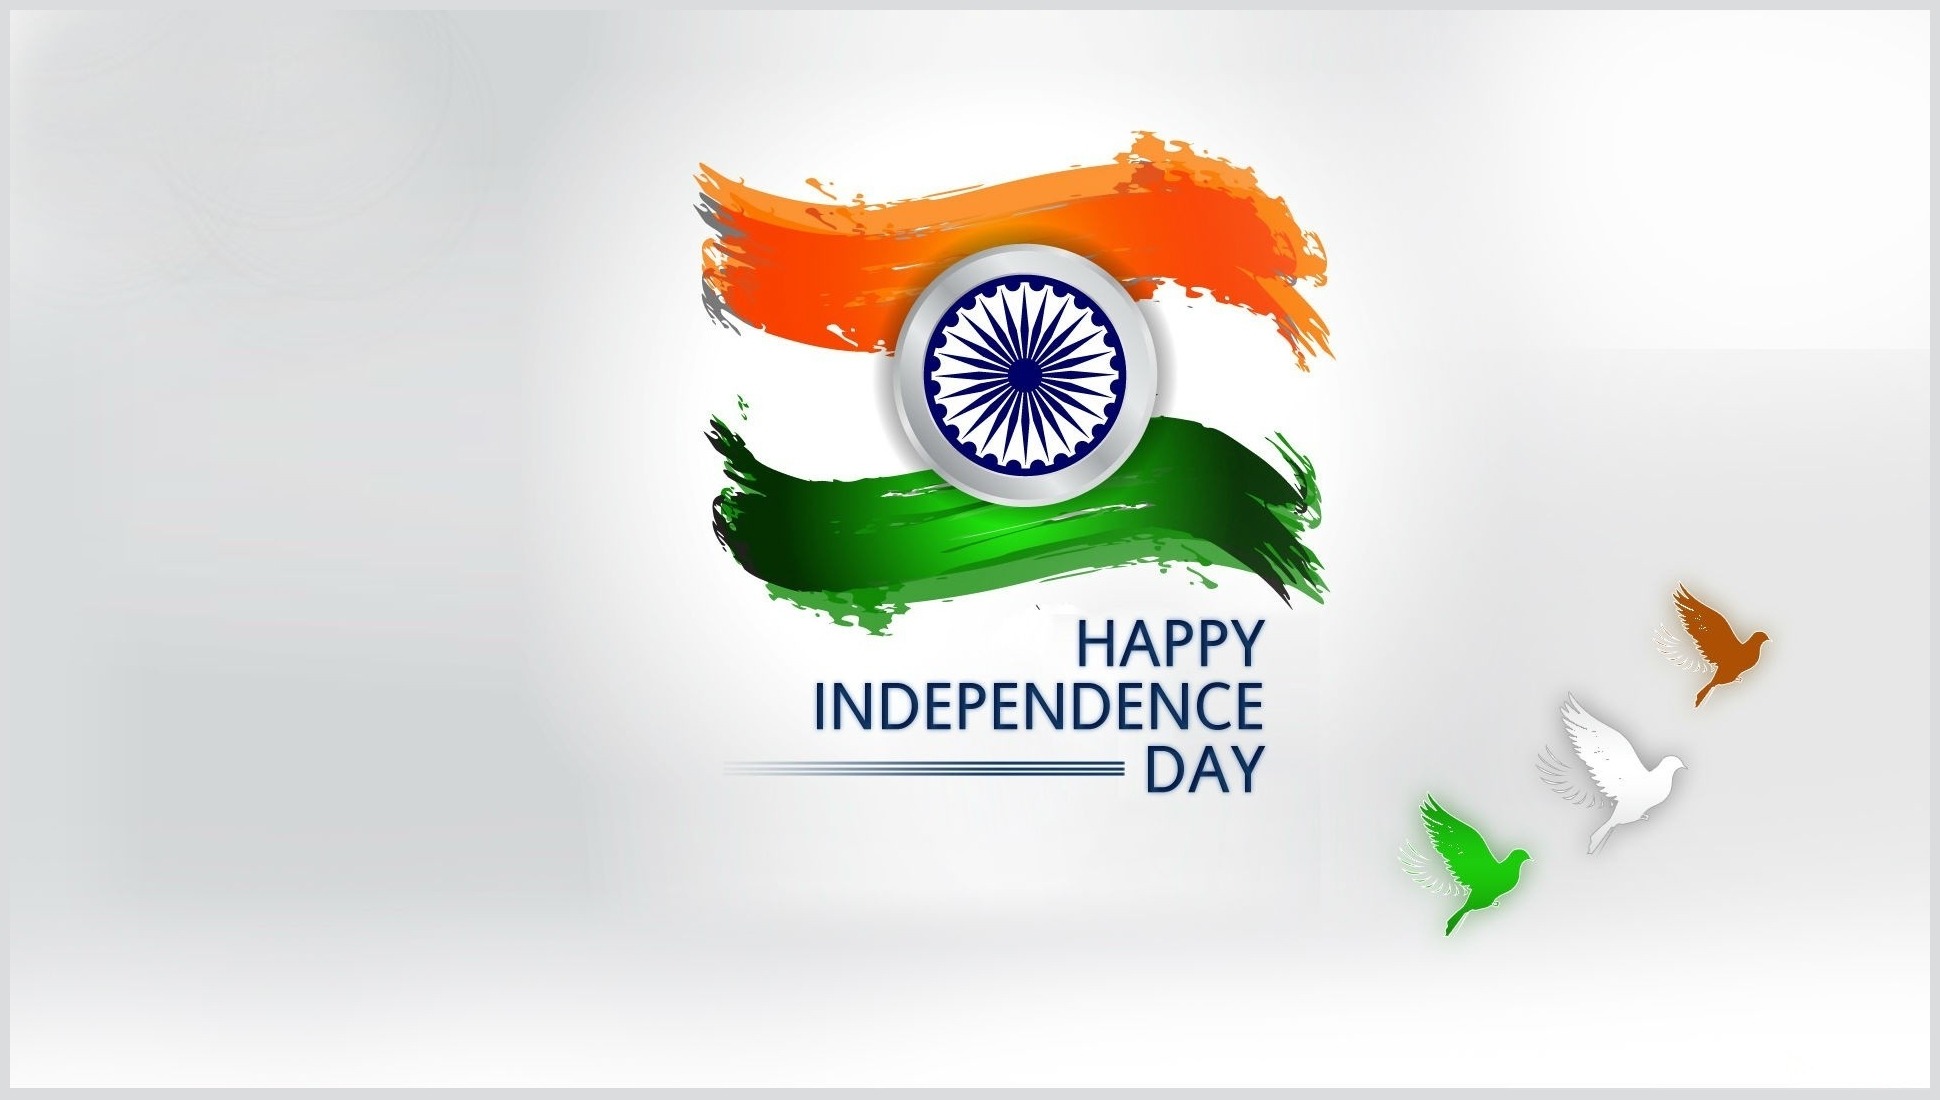 73rd Independence Day: 15 August Significance, Announcement, History, Quotes & Image